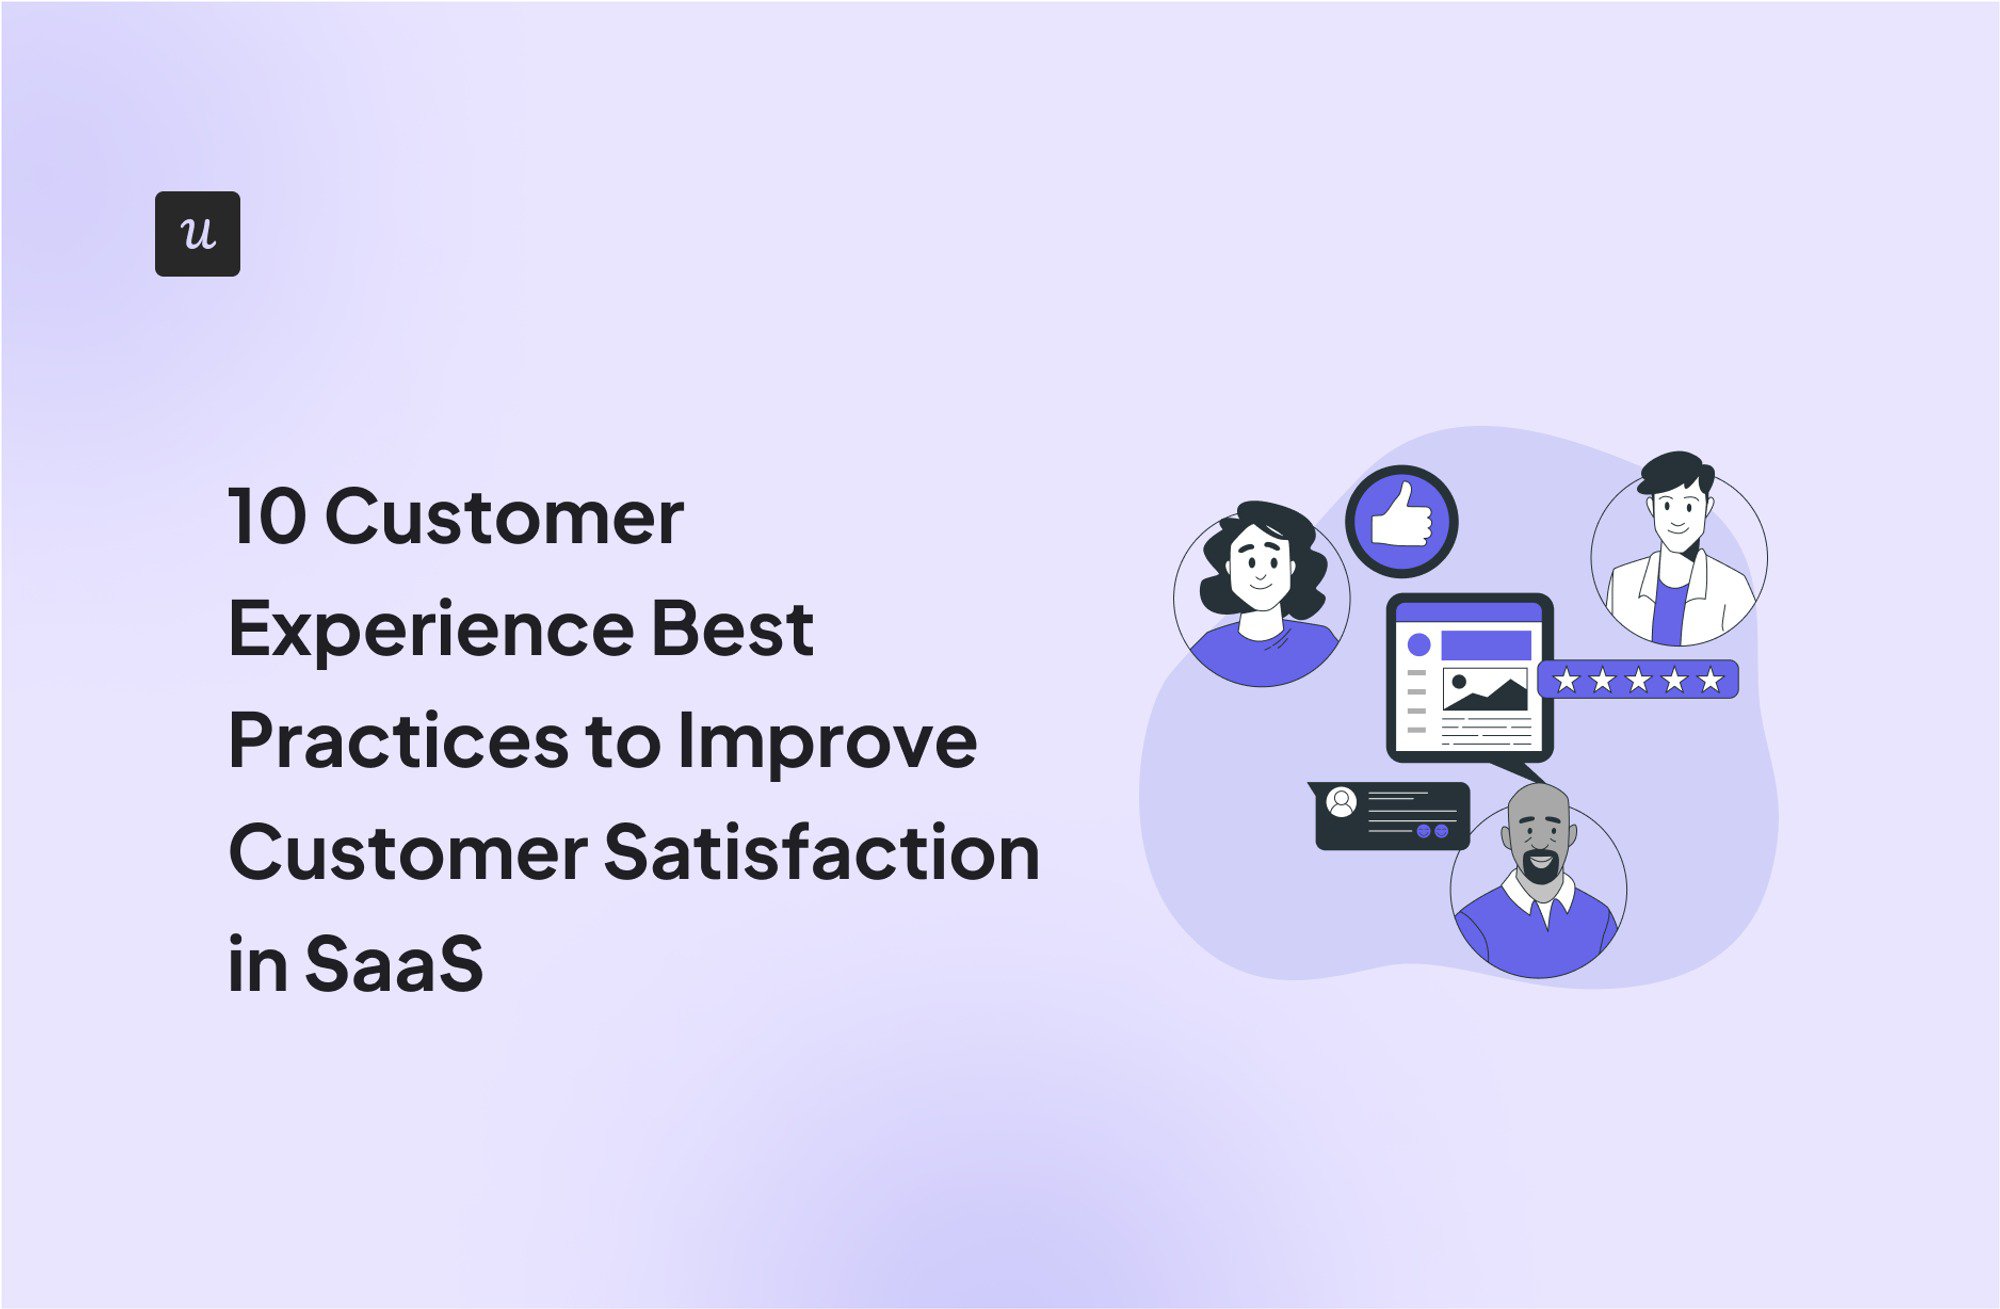 10 Customer Experience Best Practices to Improve Customer Satisfaction in SaaS cover